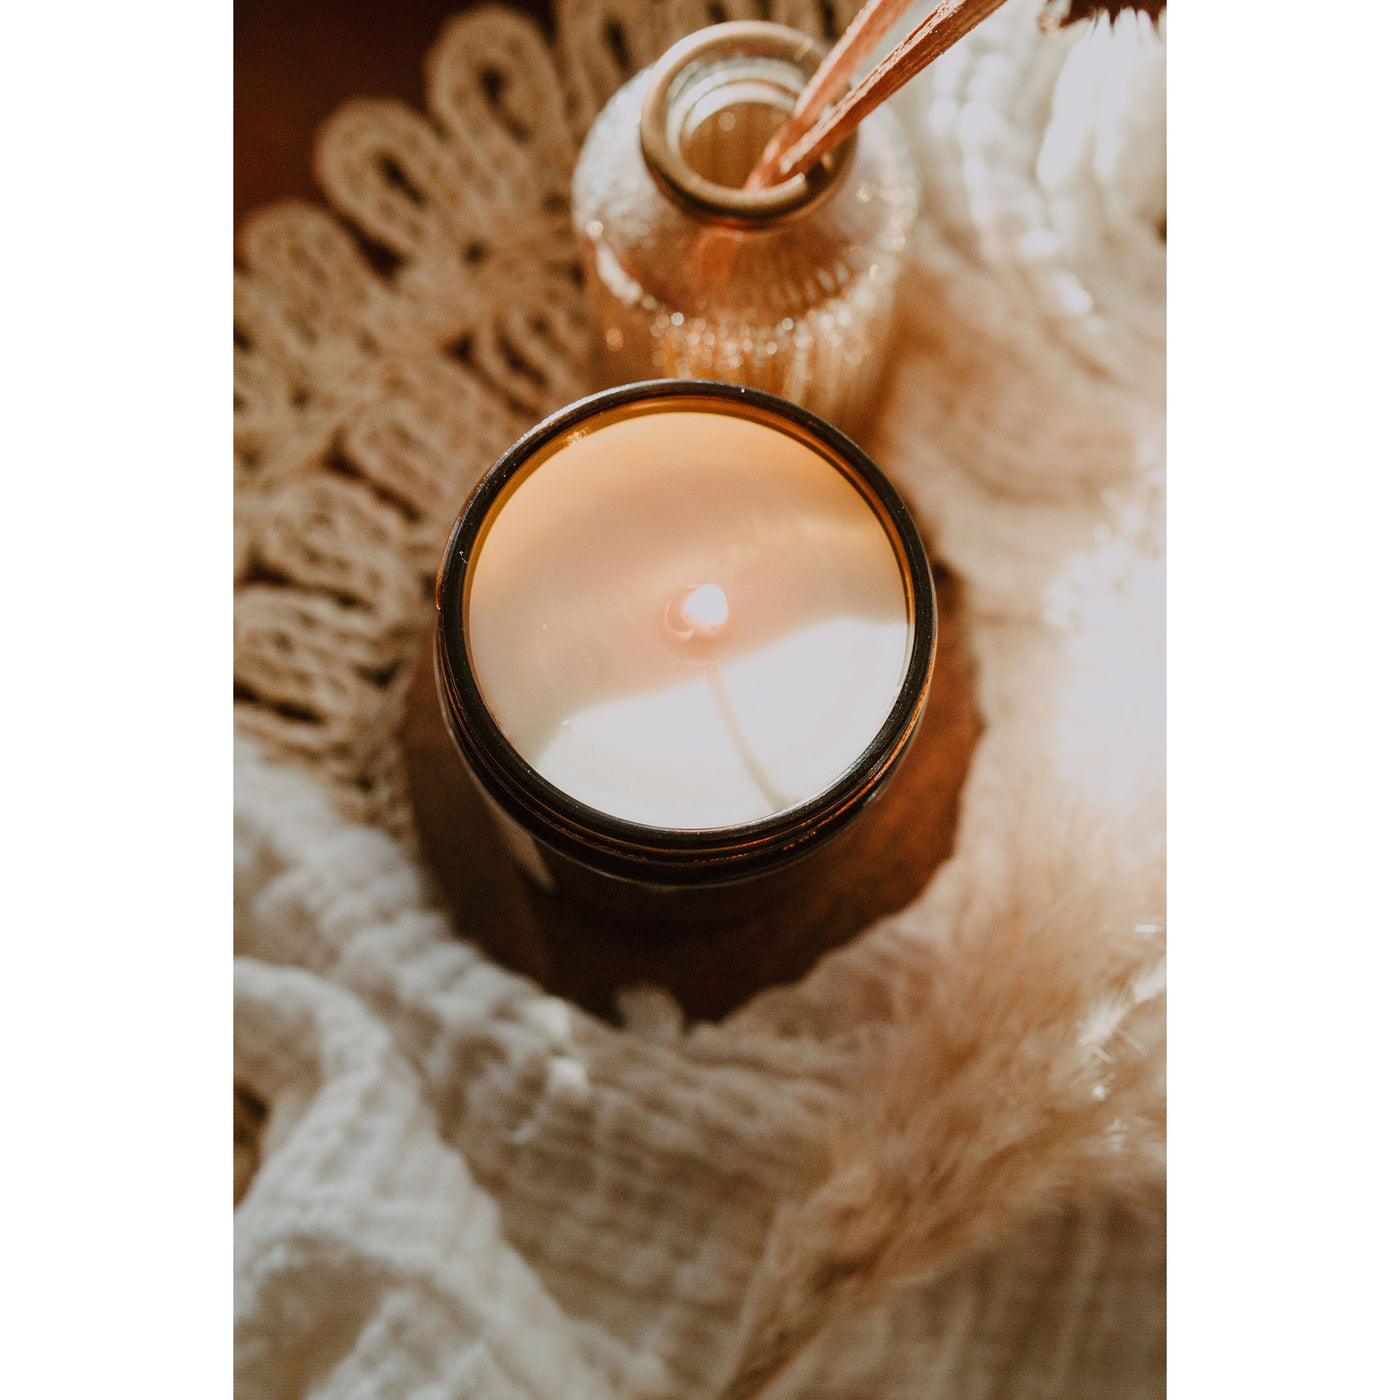 Sugar Plum - Scented Soy Candle - Almira Creations